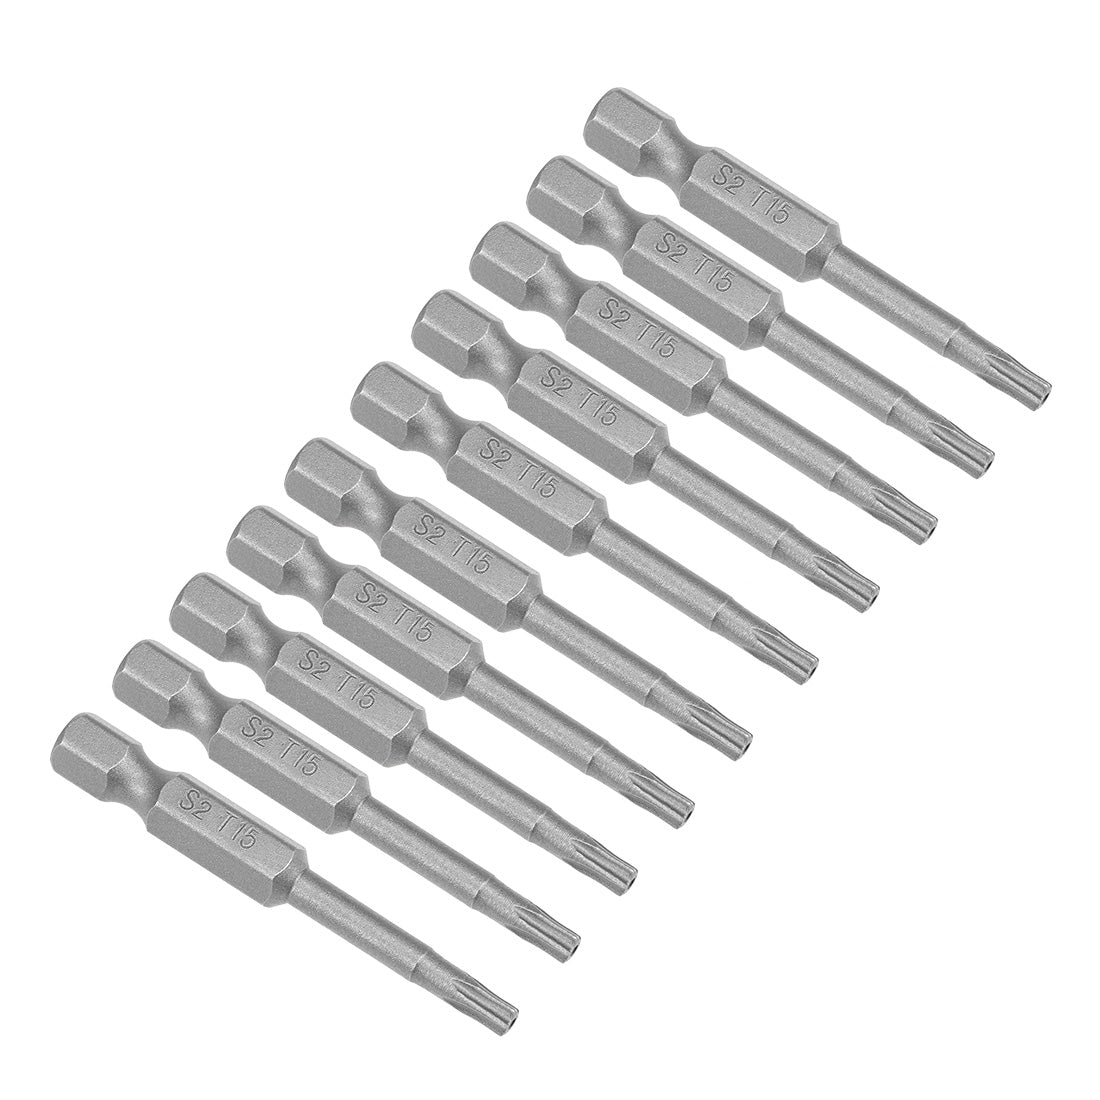 uxcell Uxcell 10 Pcs Magnetic T15 Star 5 Point Screwdriver Bits, 1/4 Inch Hex Shank 2-inch Length S2 Security Screw Driver Kit Tools